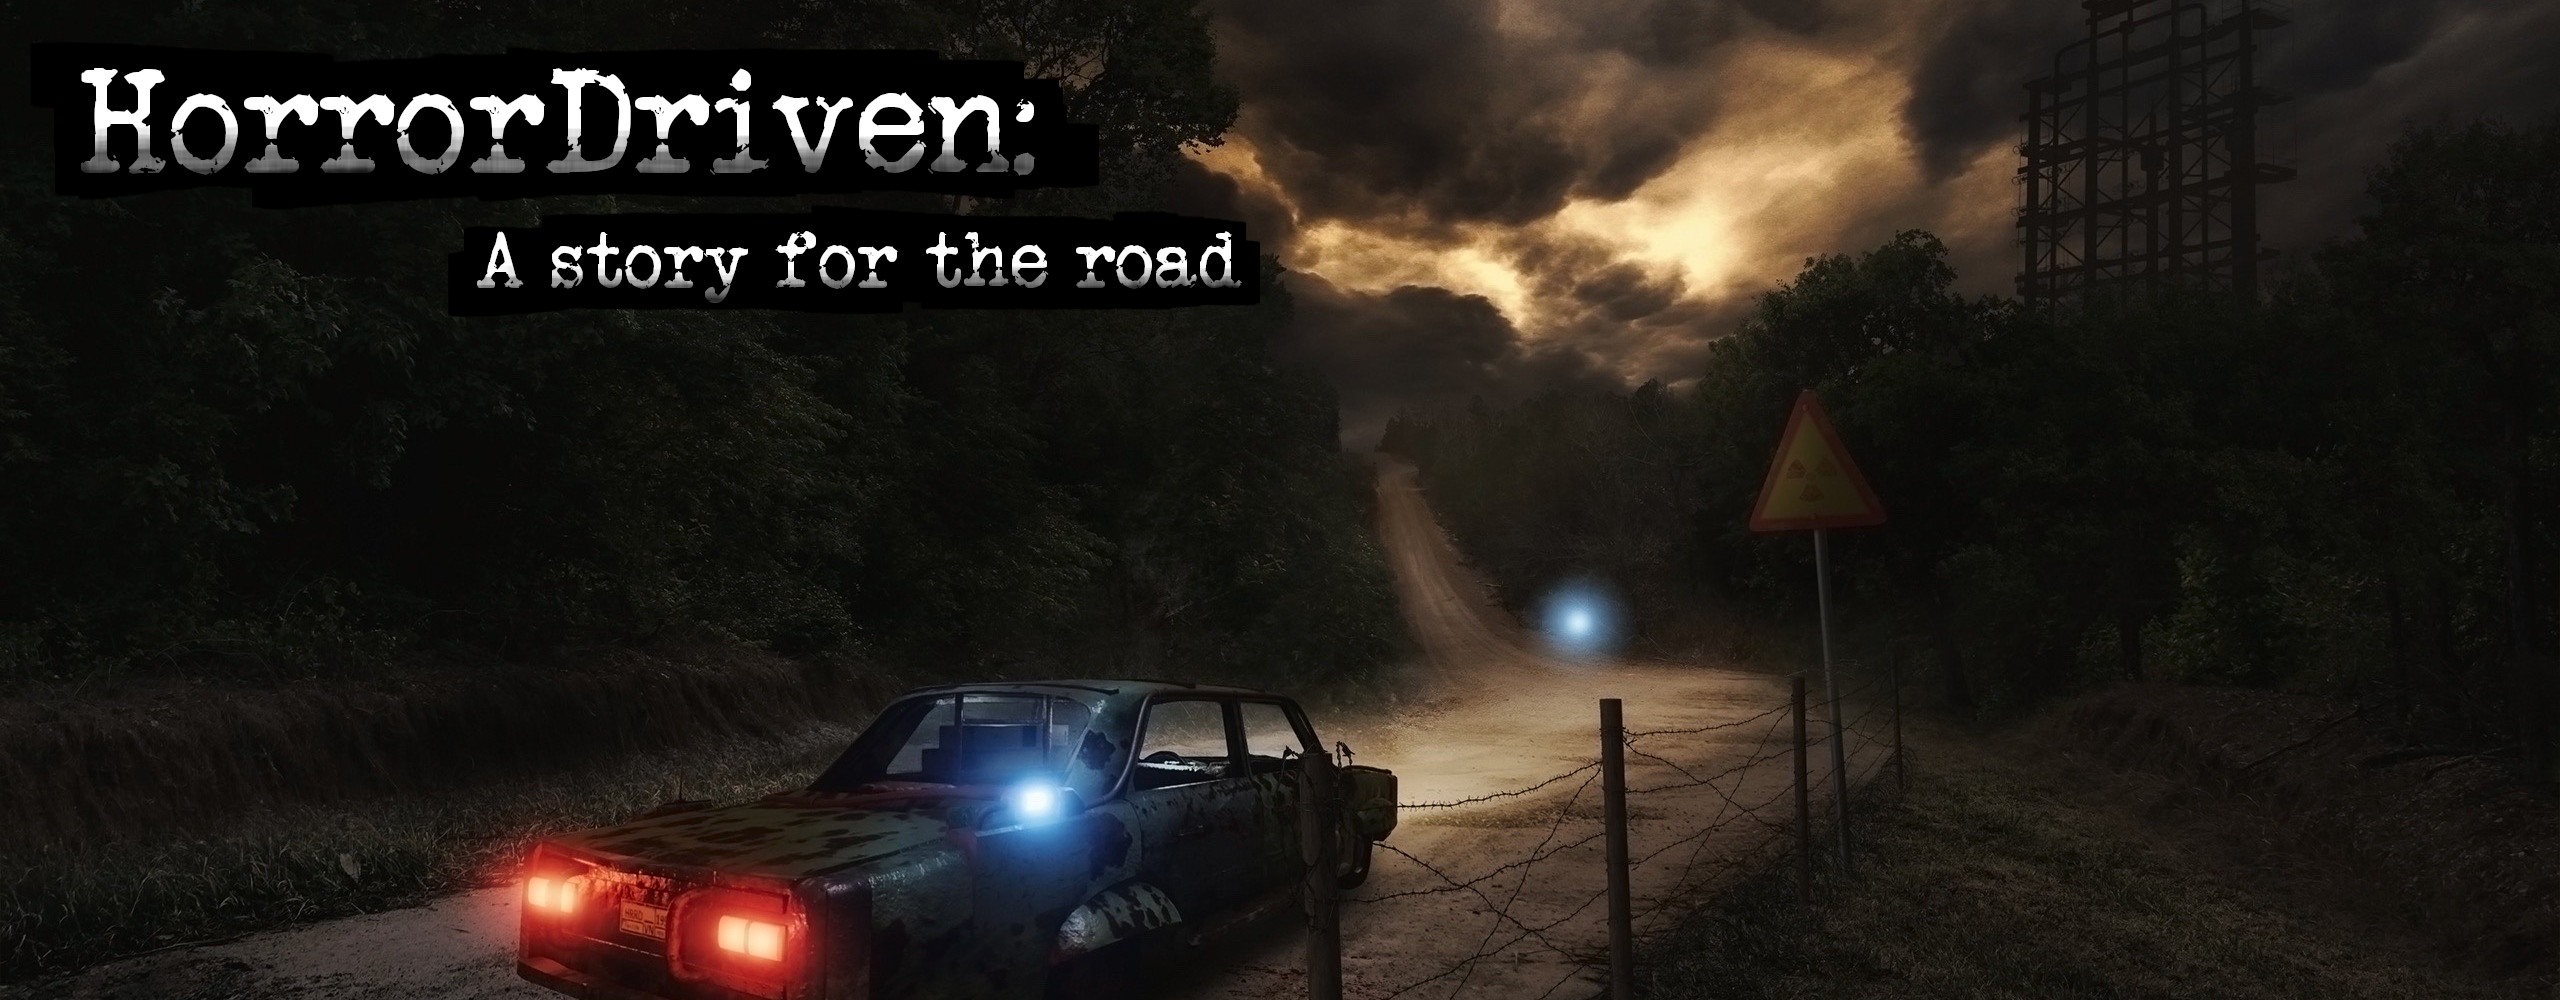 HorrorDriven: A story for the road Demo